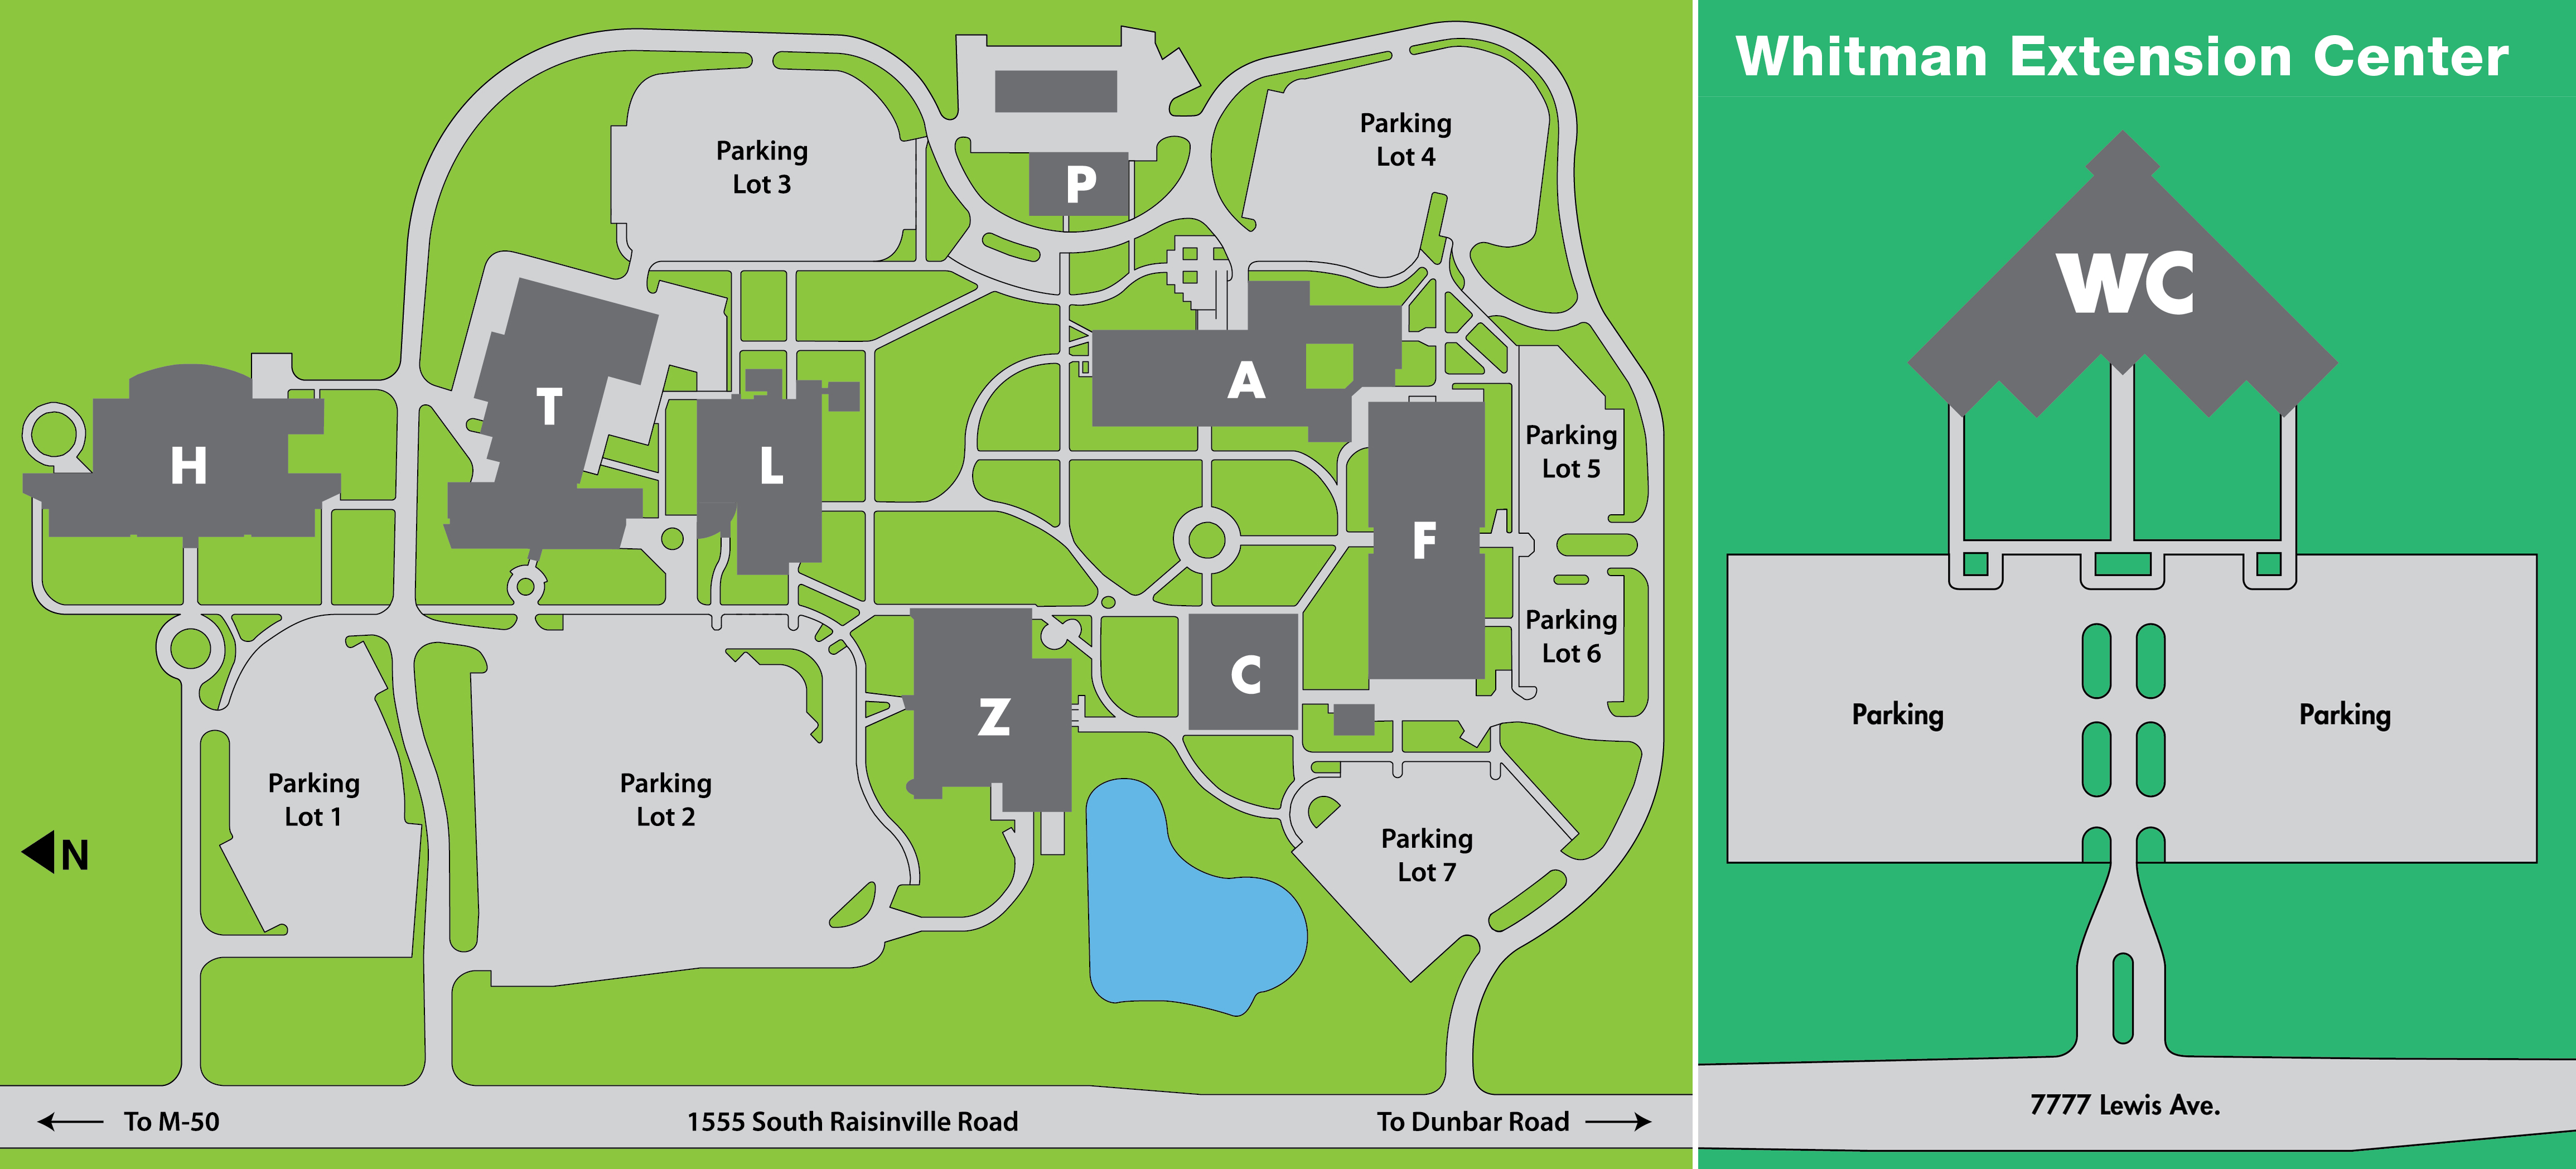 Main Campus and Whitman Center Map